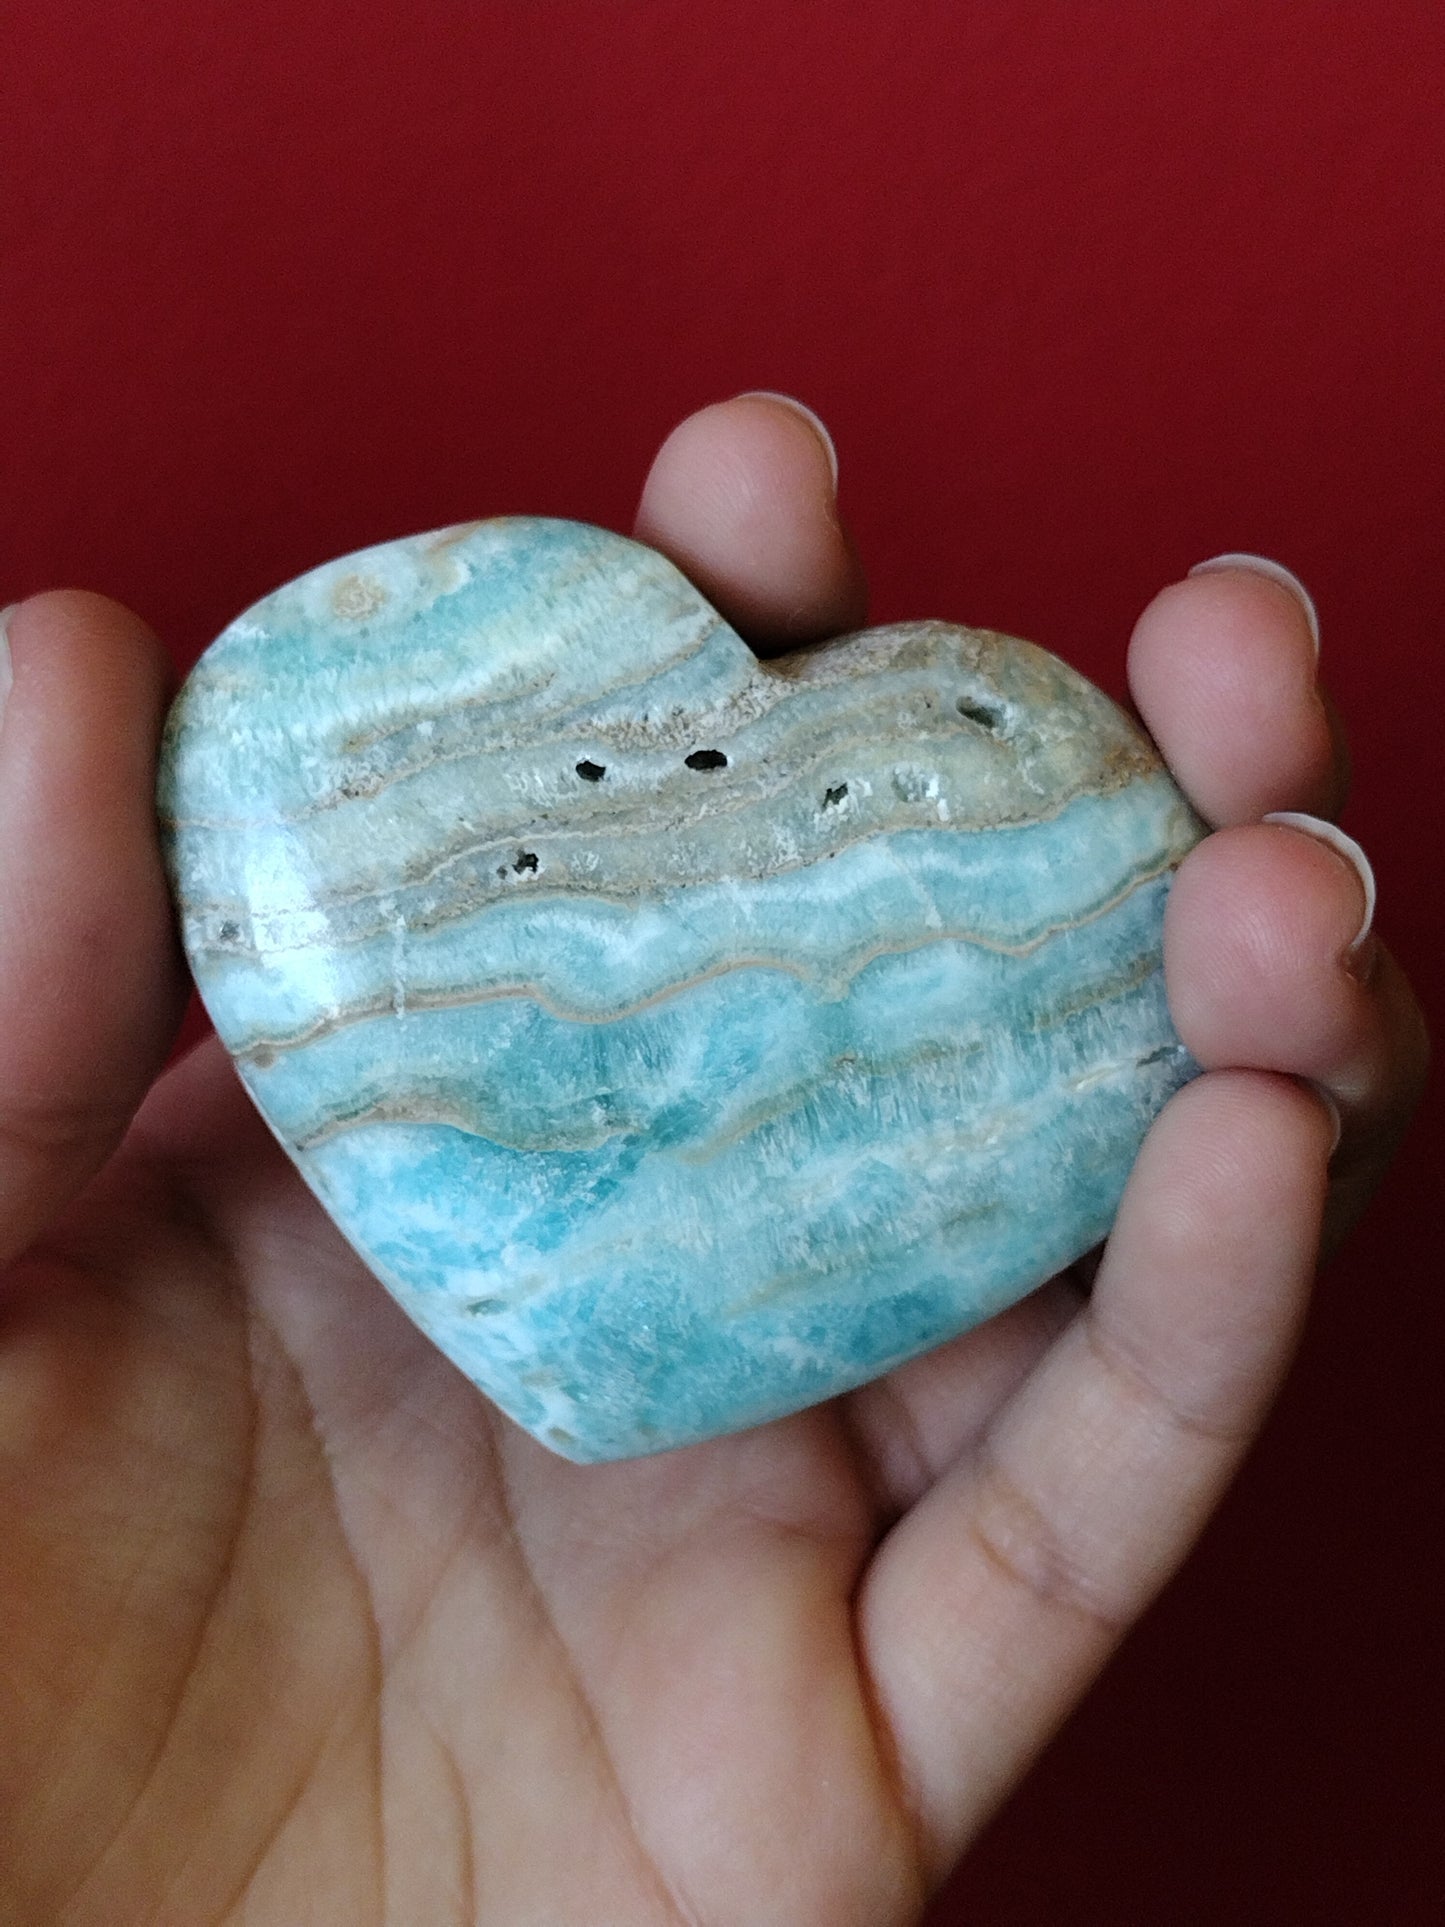 Blue aragonite, also known as Caribbean calcite, hearts available at wholesale and retail prices, only at our crystal shop in San Diego!